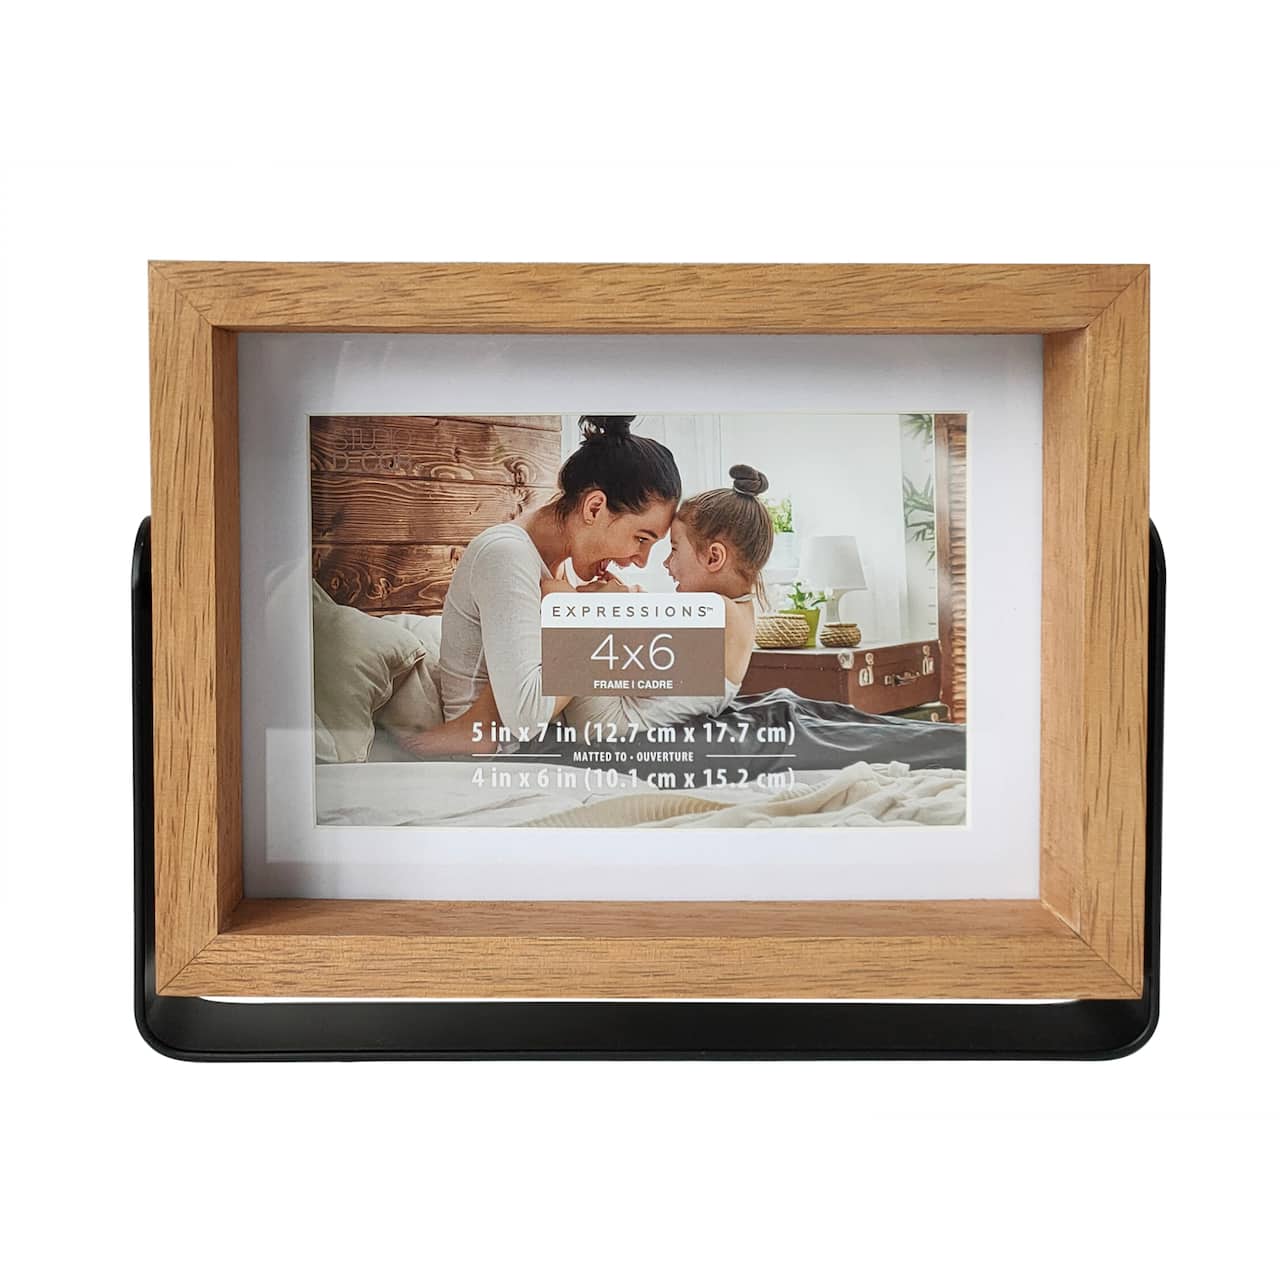 Studio Decor Expressions Natural Wood Frame with Mat in Metal Base - 4 x 6 in